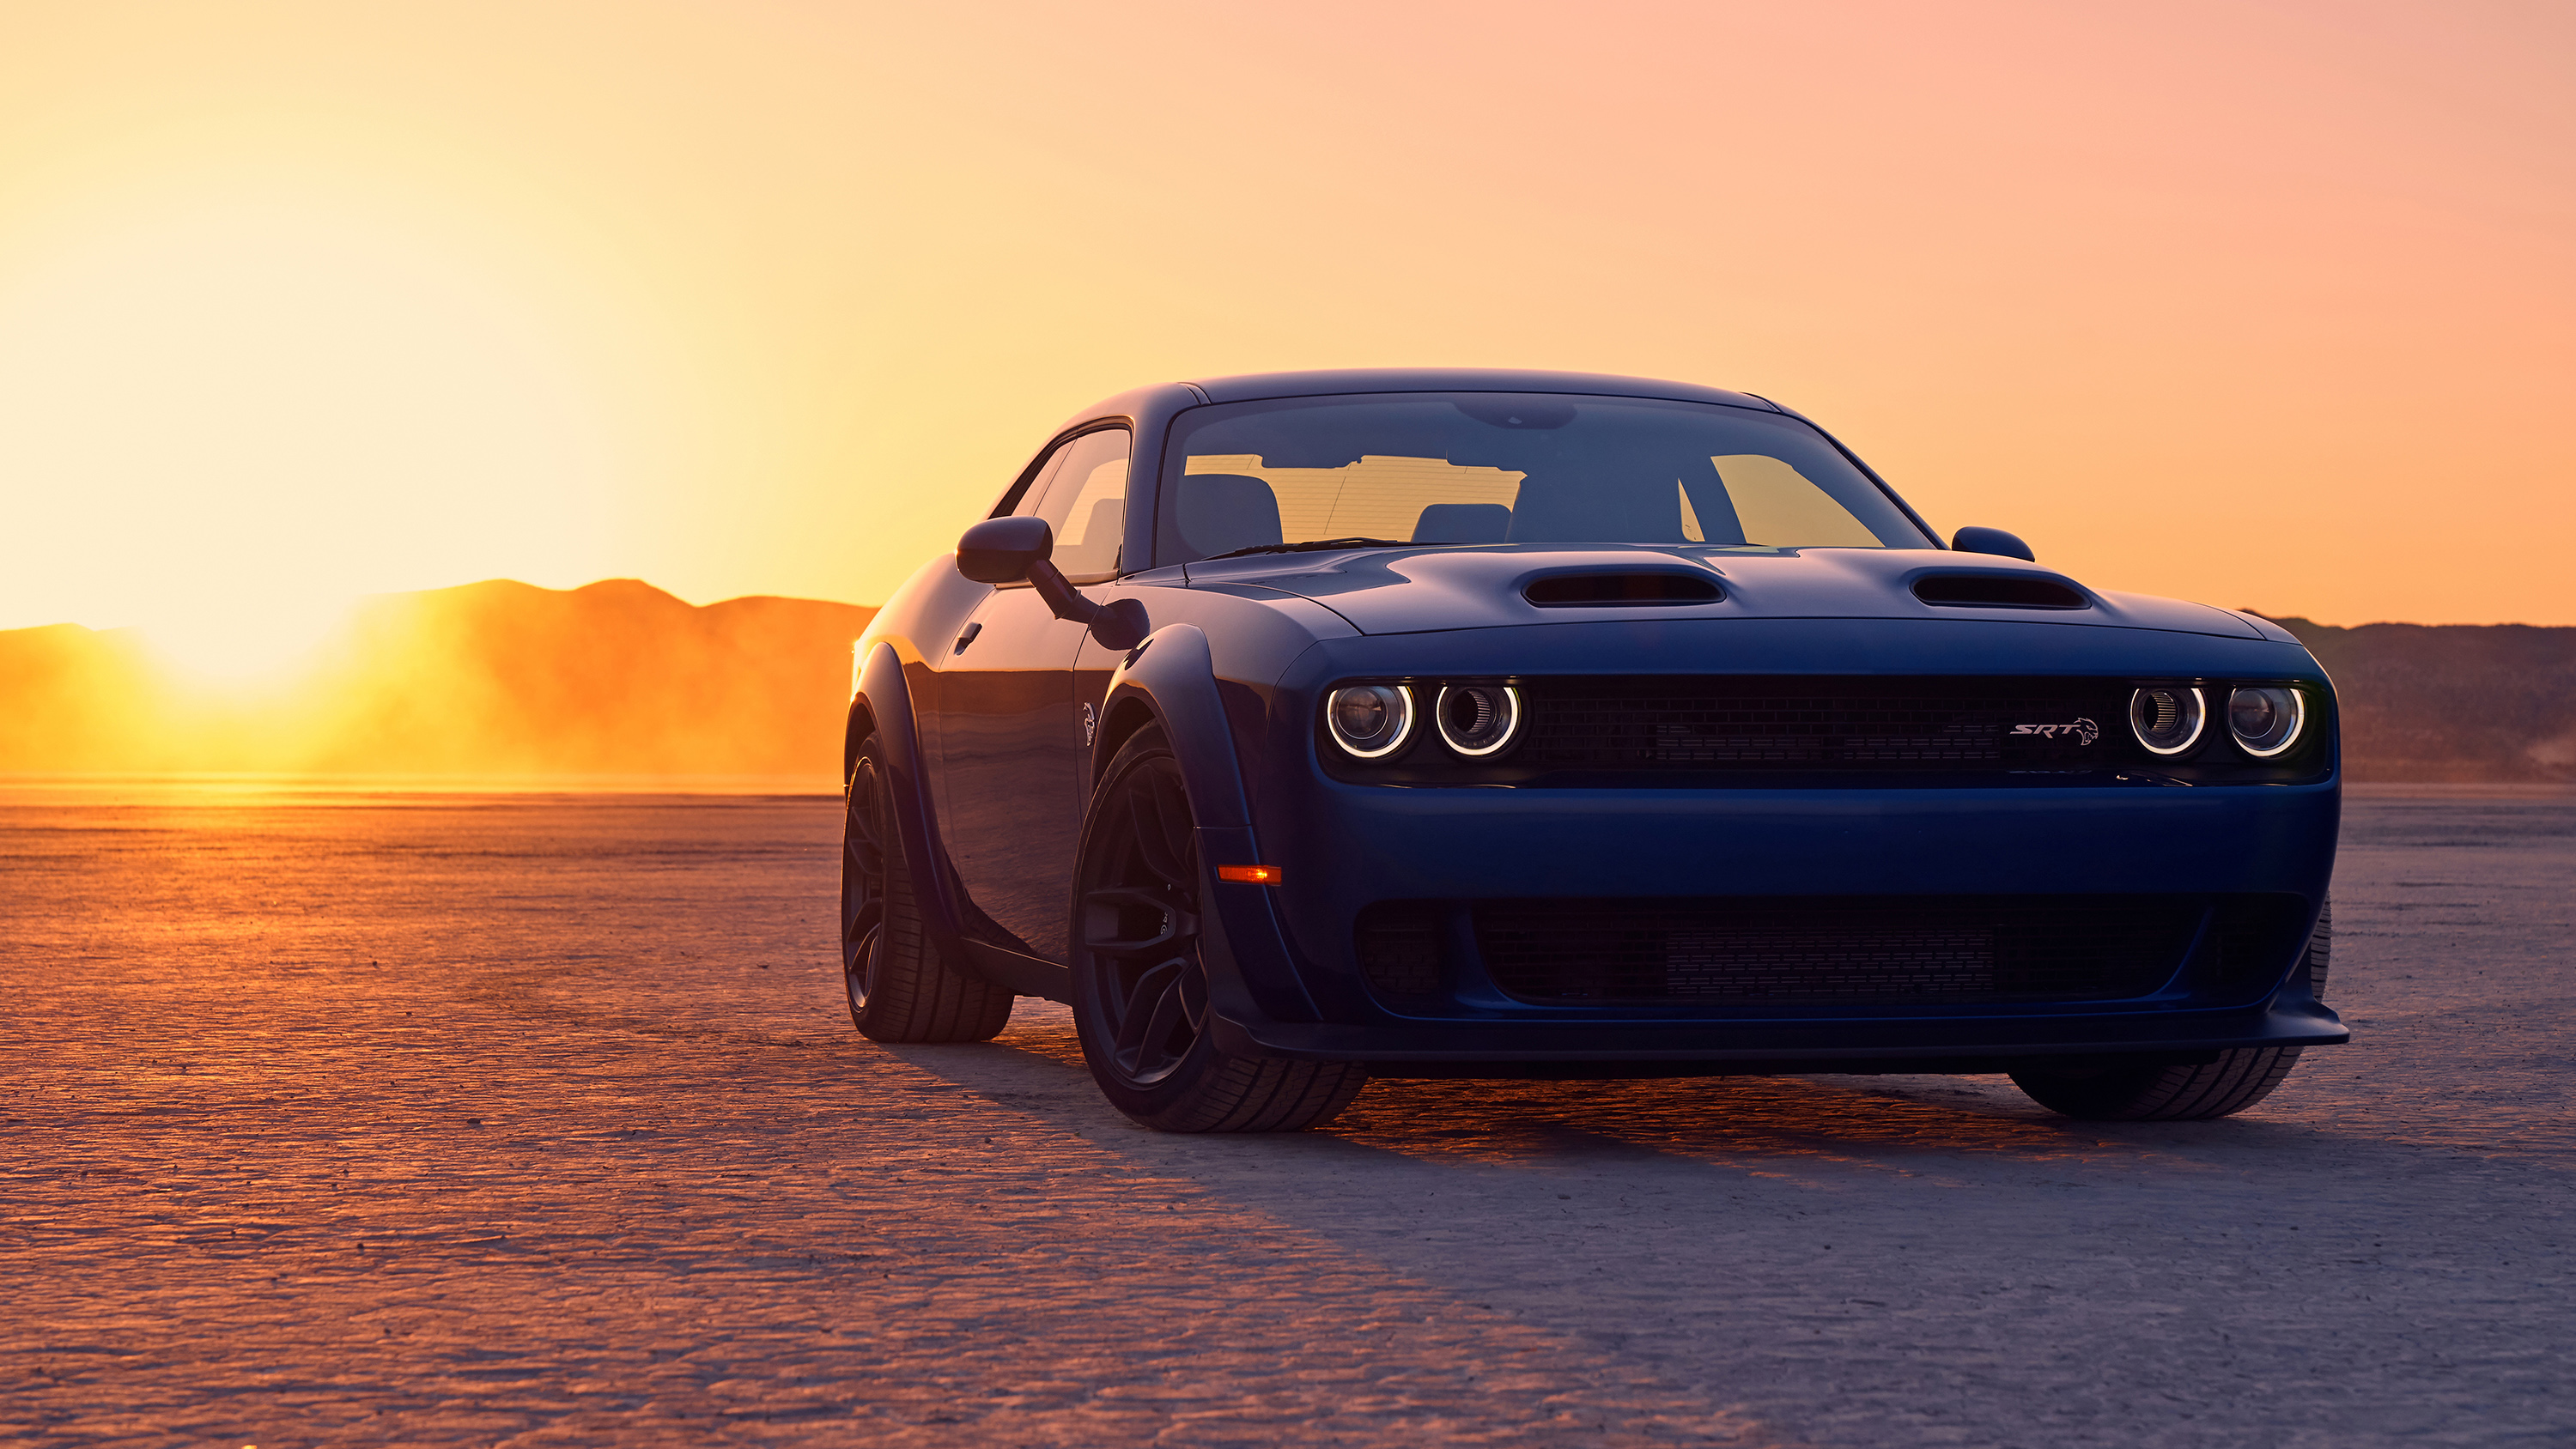 Dodge Challenger Wallpapers and Backgrounds